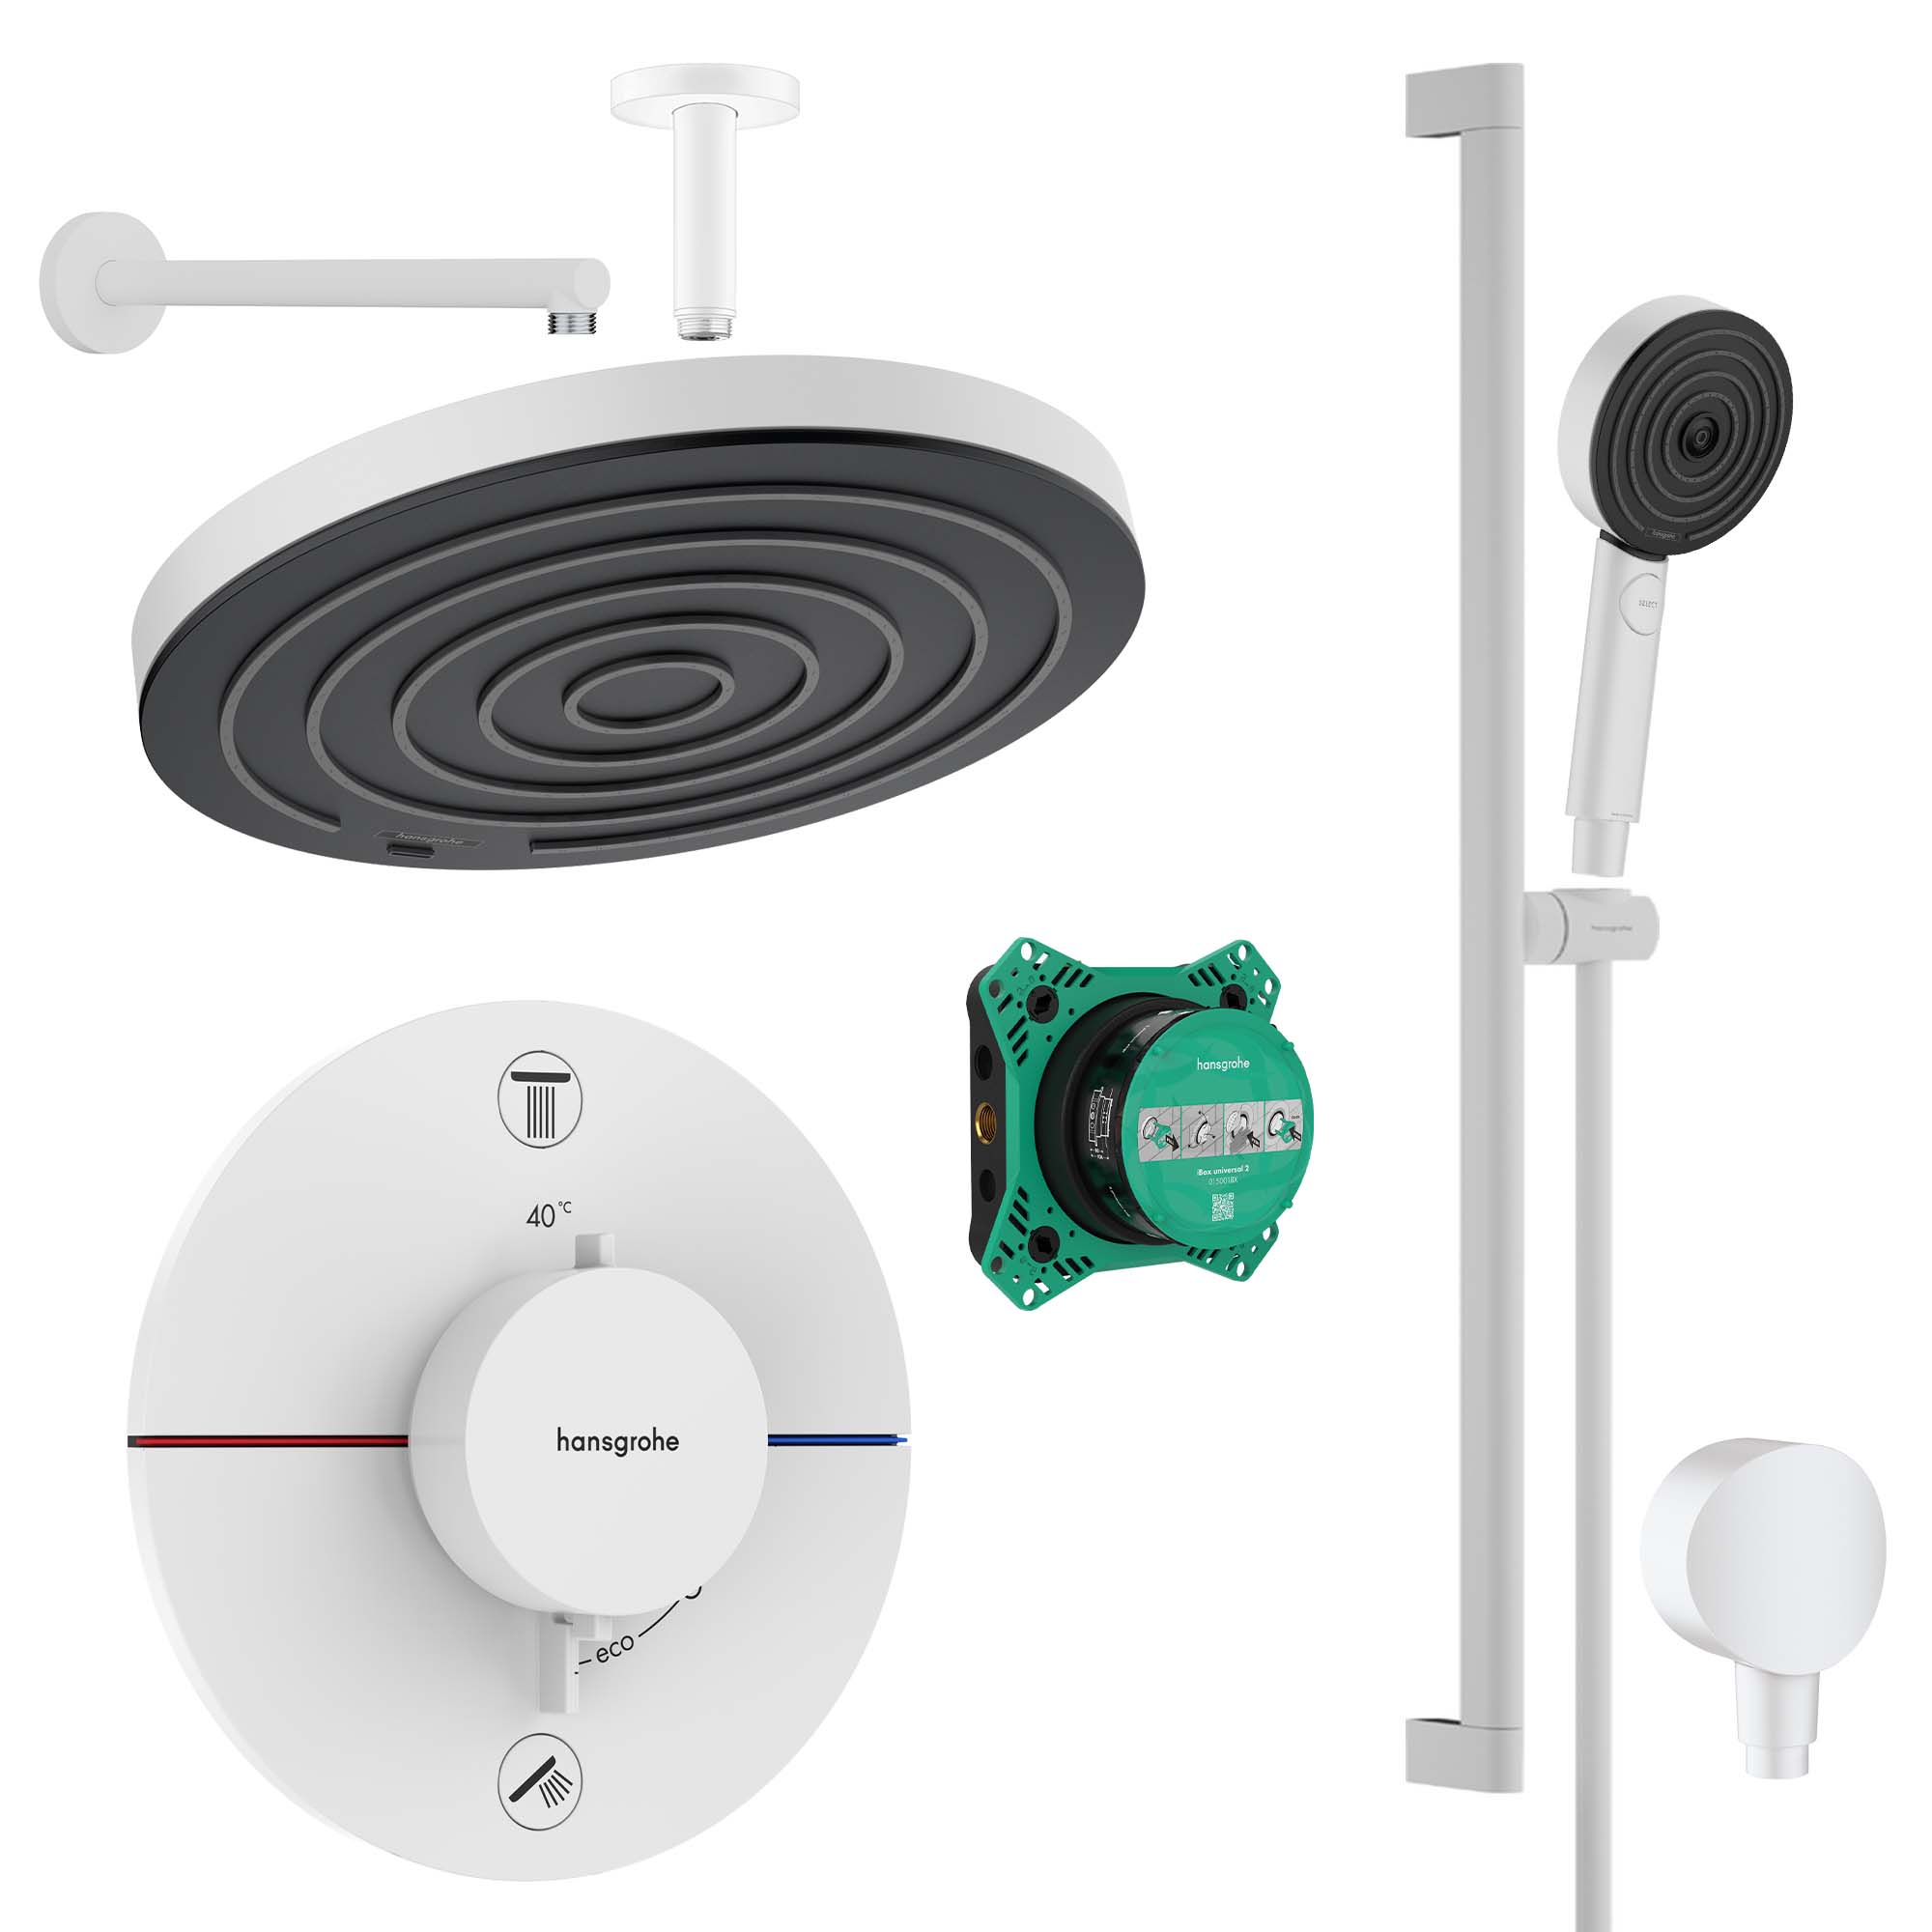 hansgrohe shower select s 2 outlet valve pulsify 260 overhead and pulsify handset matt white